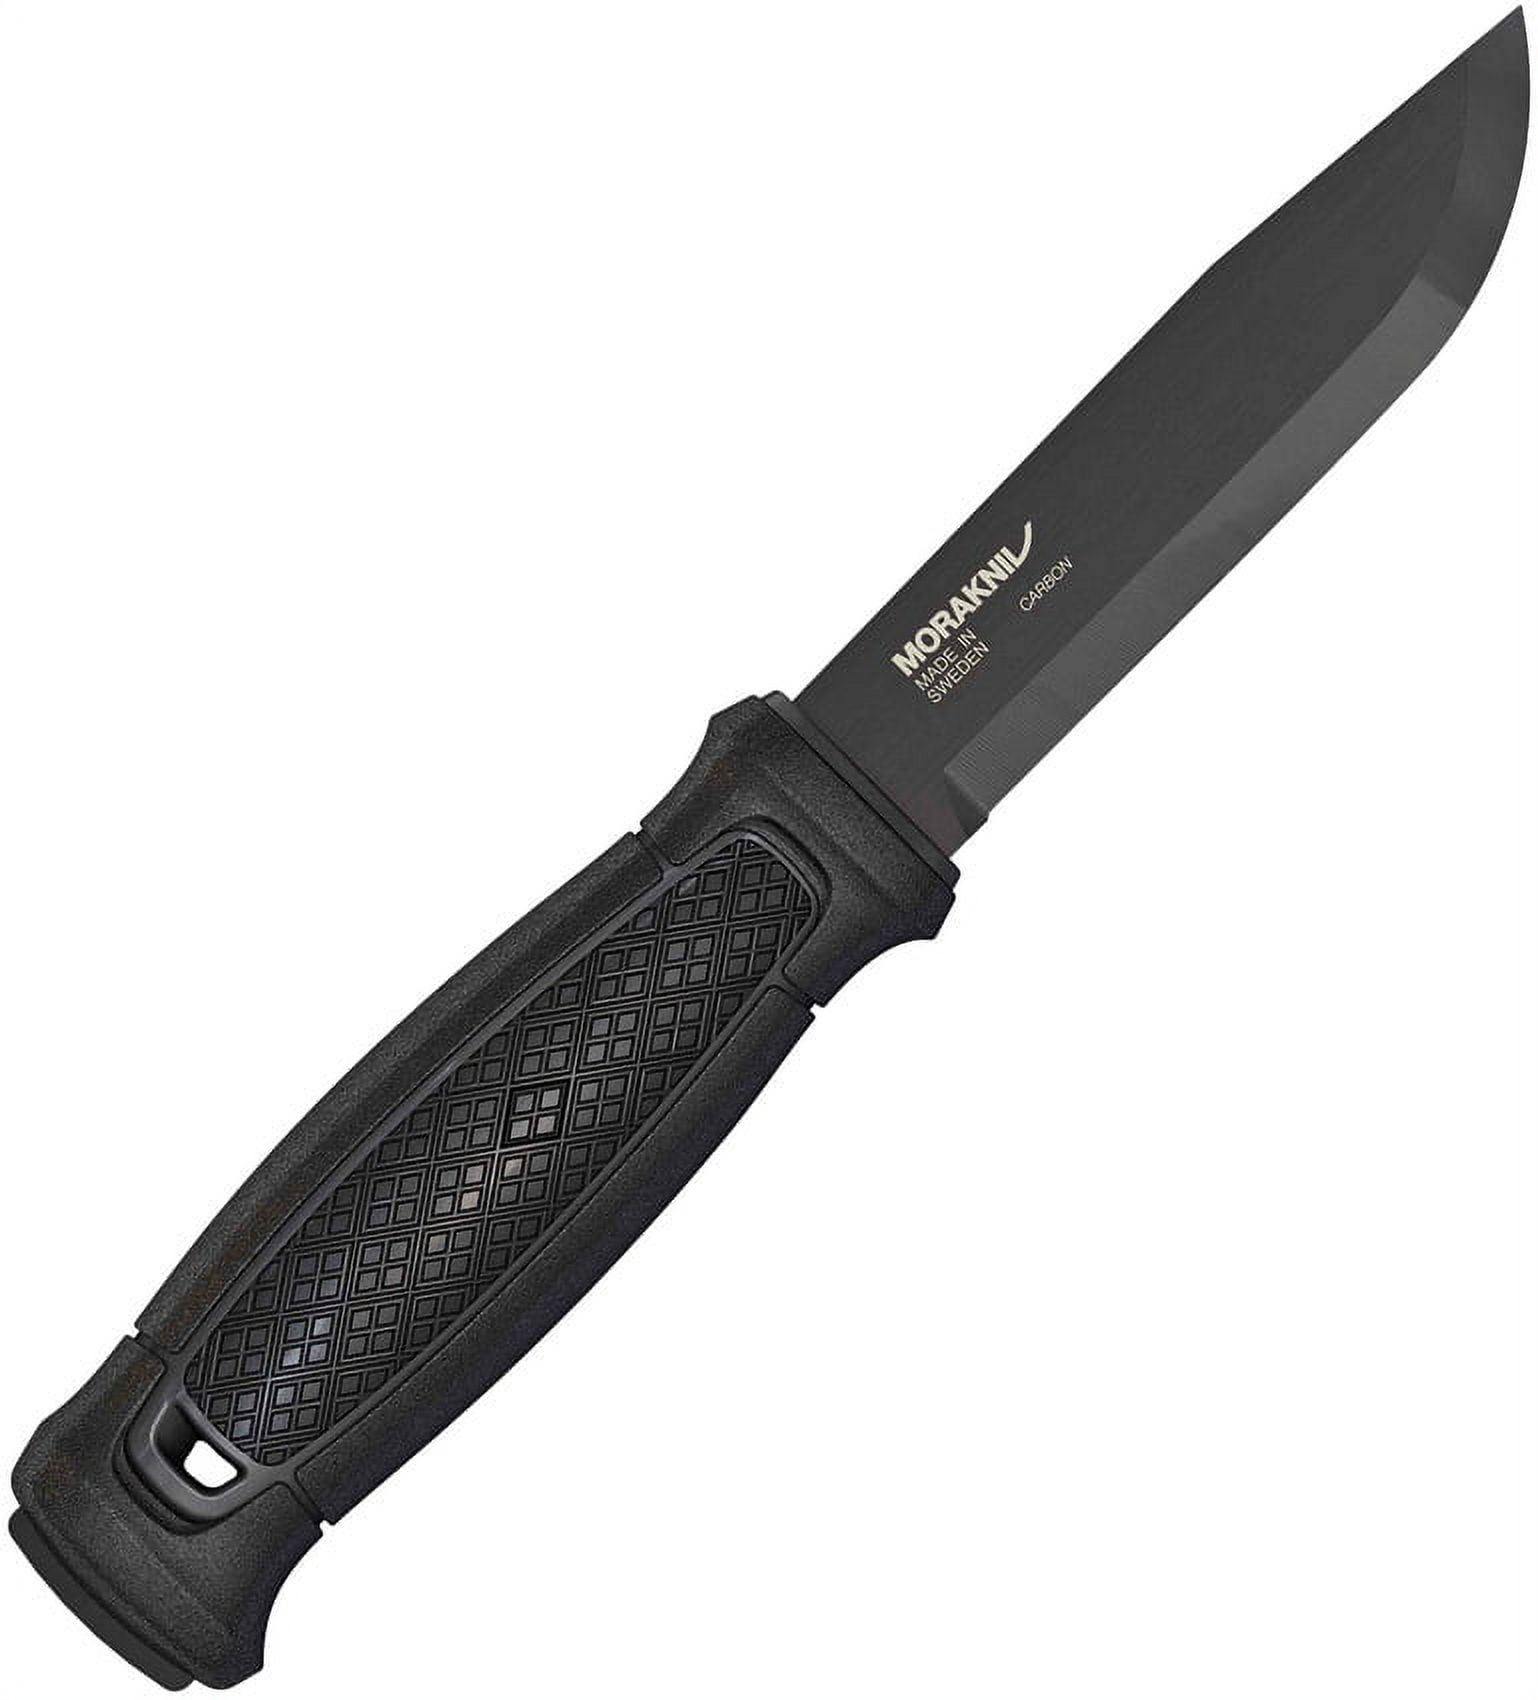  Morakniv Carbon Steel Fixed-Blade Bushcraft Knife with Sheath,  Black, 4.3 Inch : Tactical Fixed Blade Knives : Sports & Outdoors